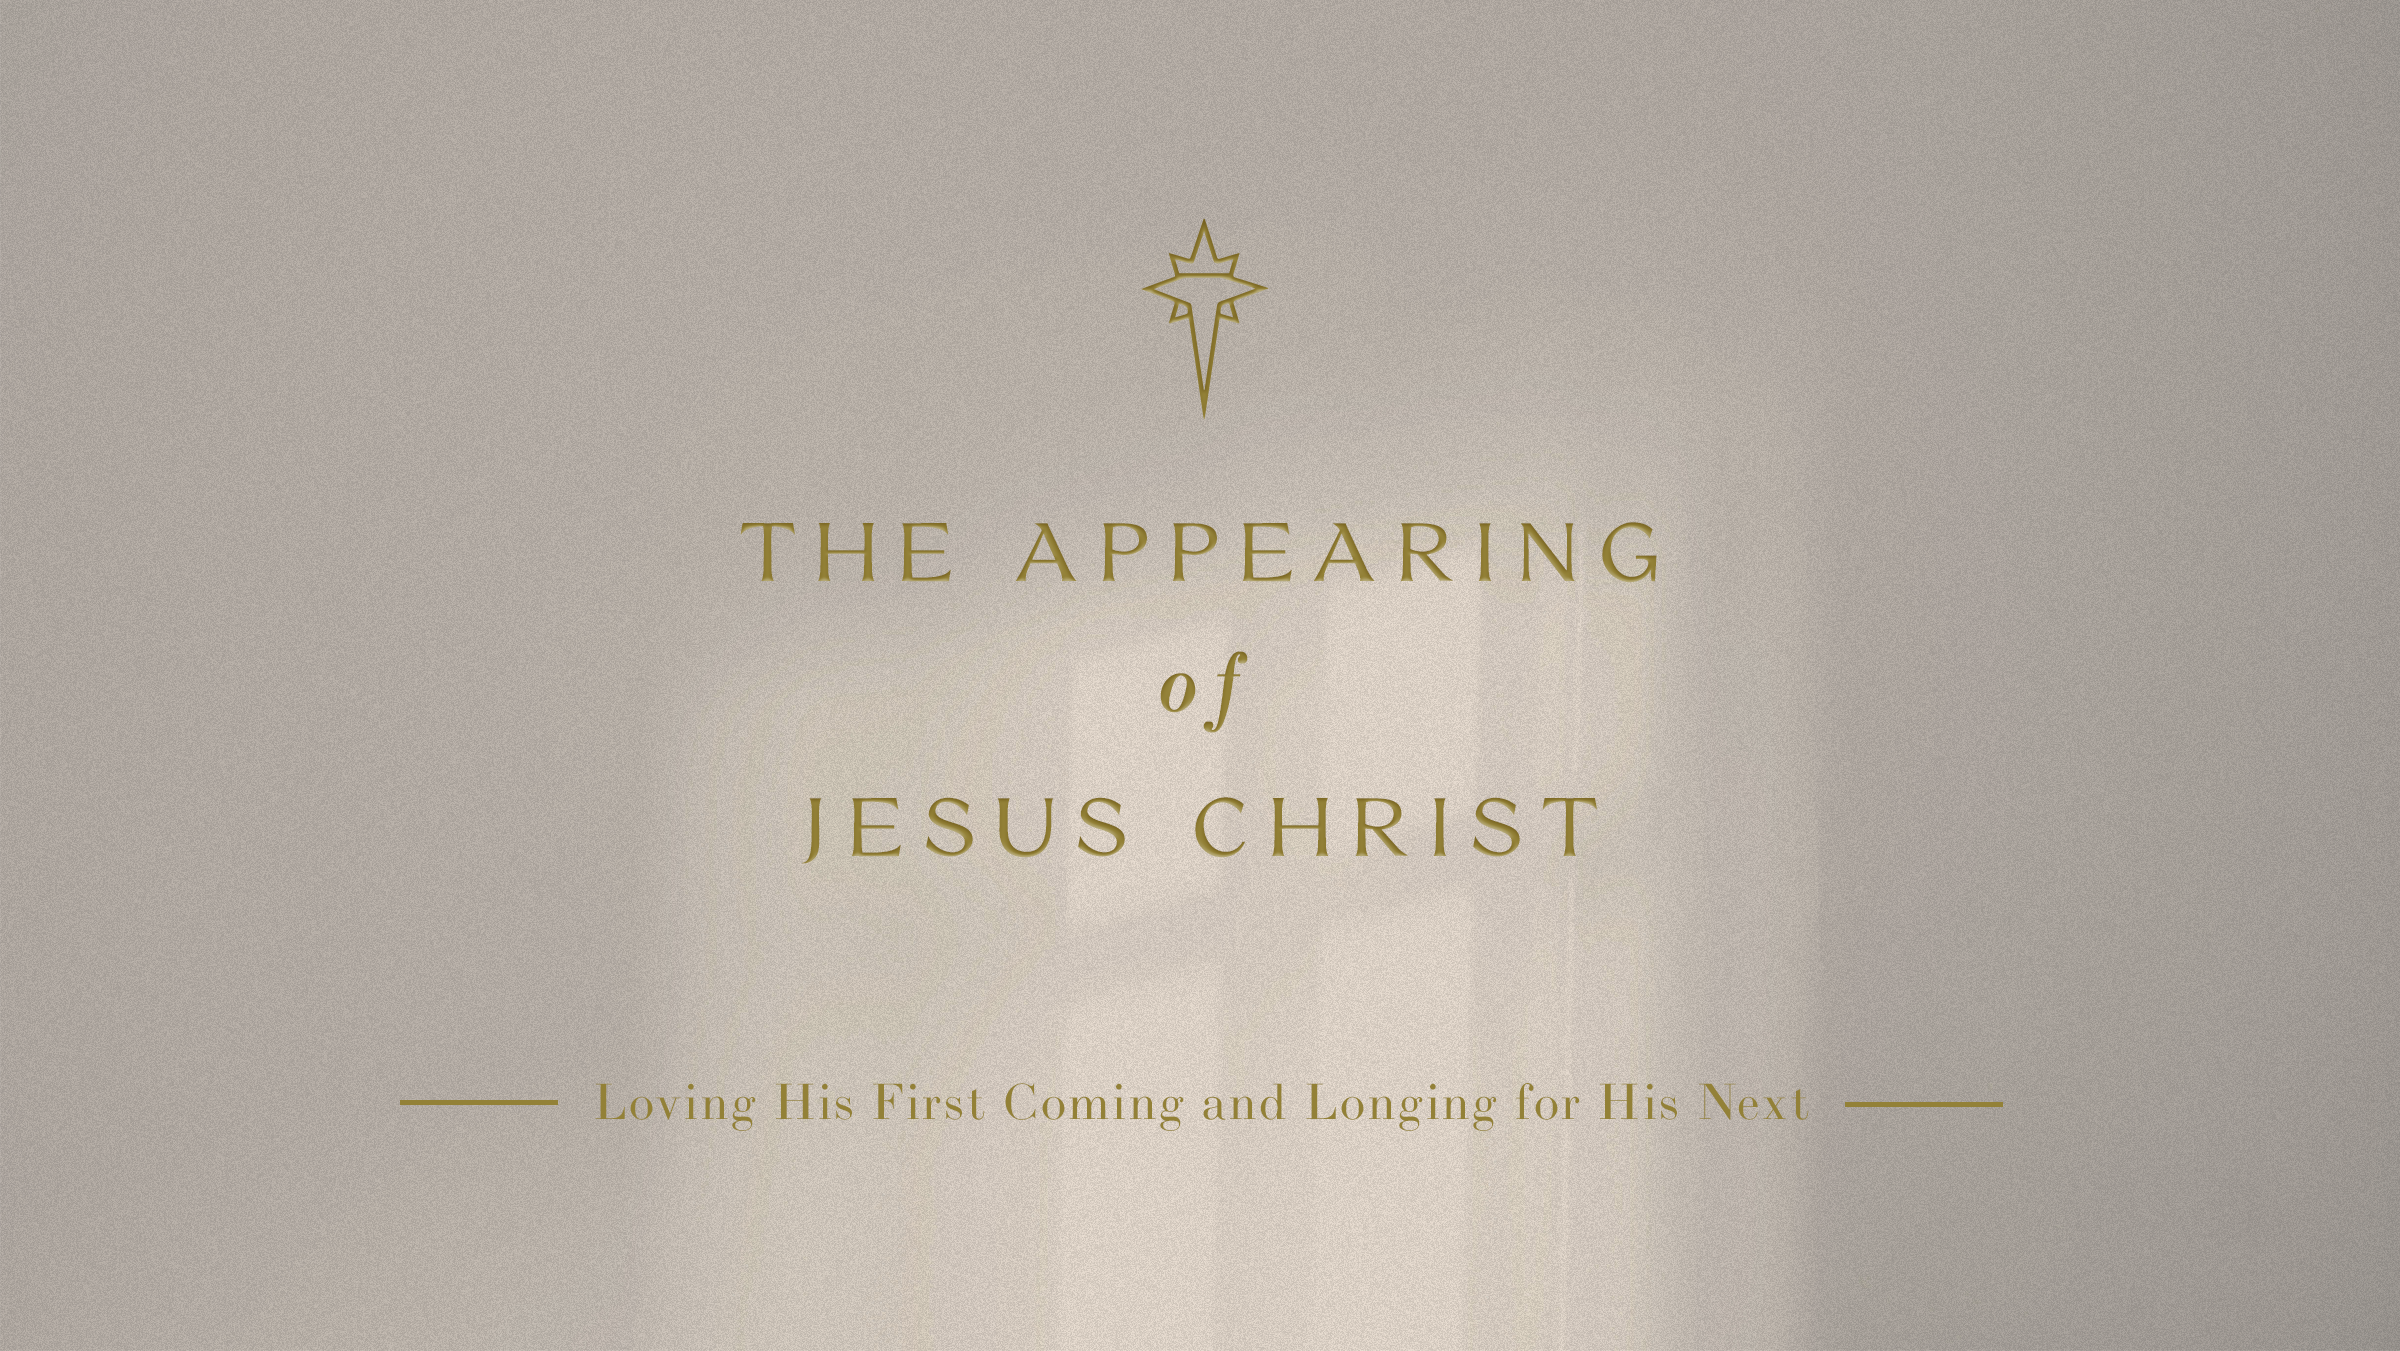 The Appearing of Jesus Christ